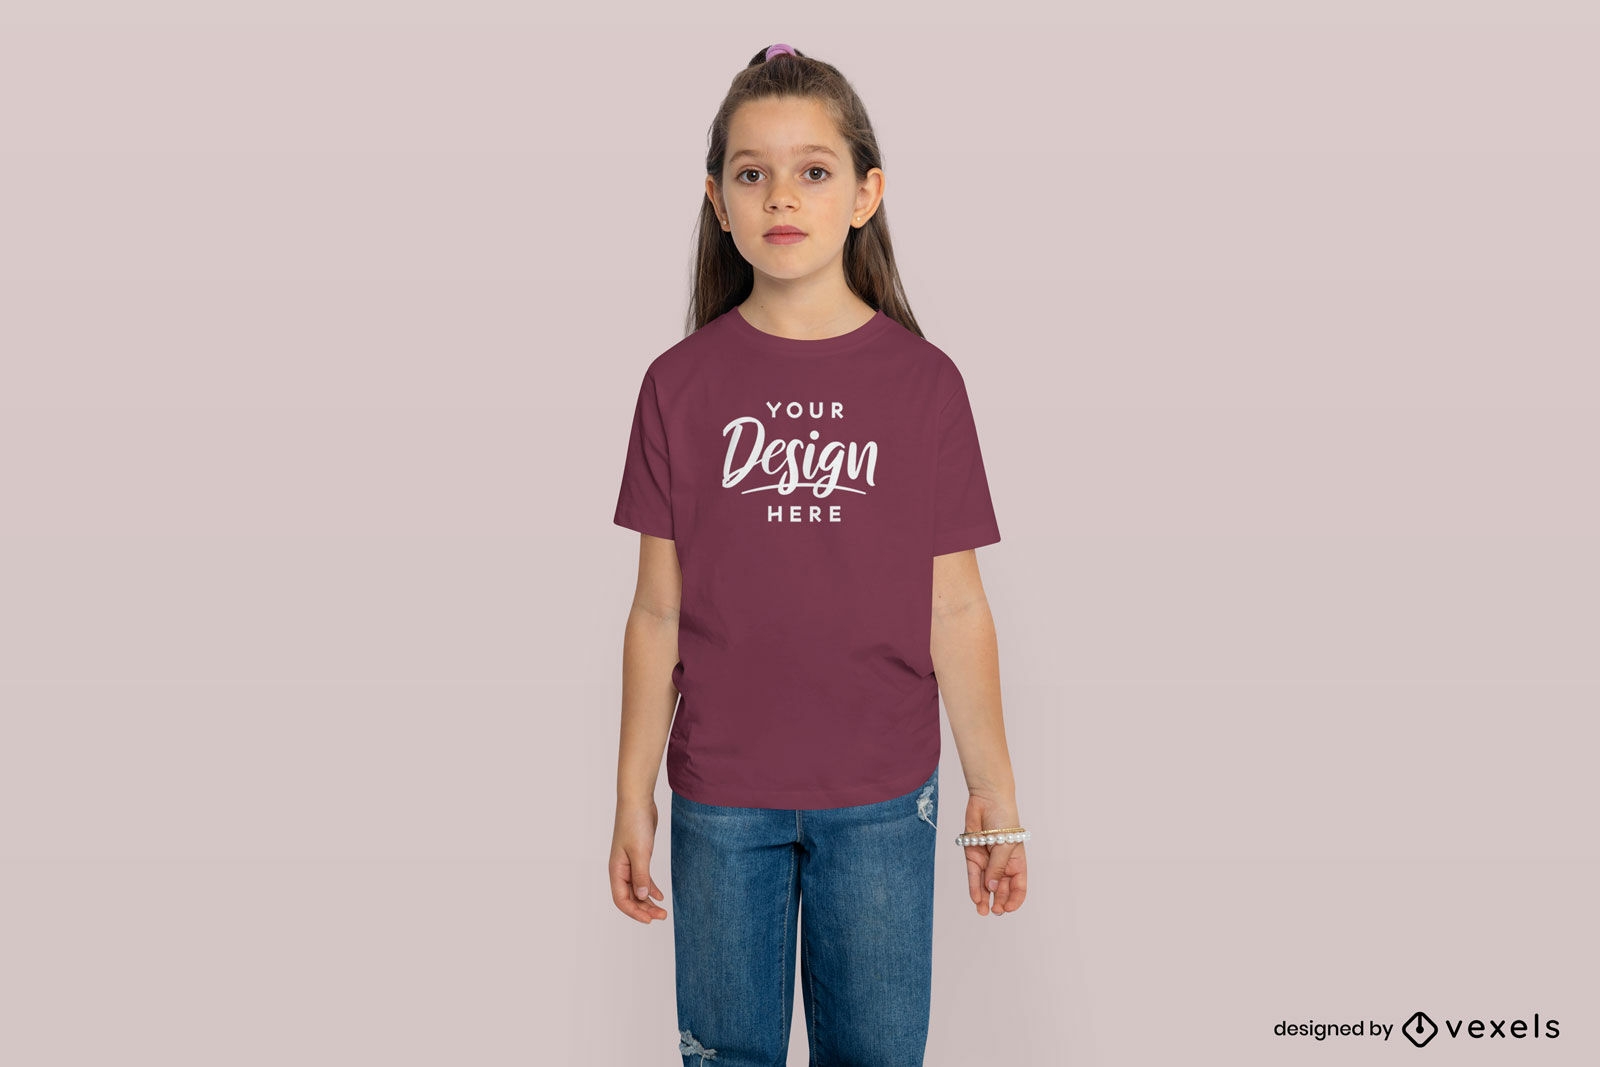 Little girl in ponytail and t-shirt mockup